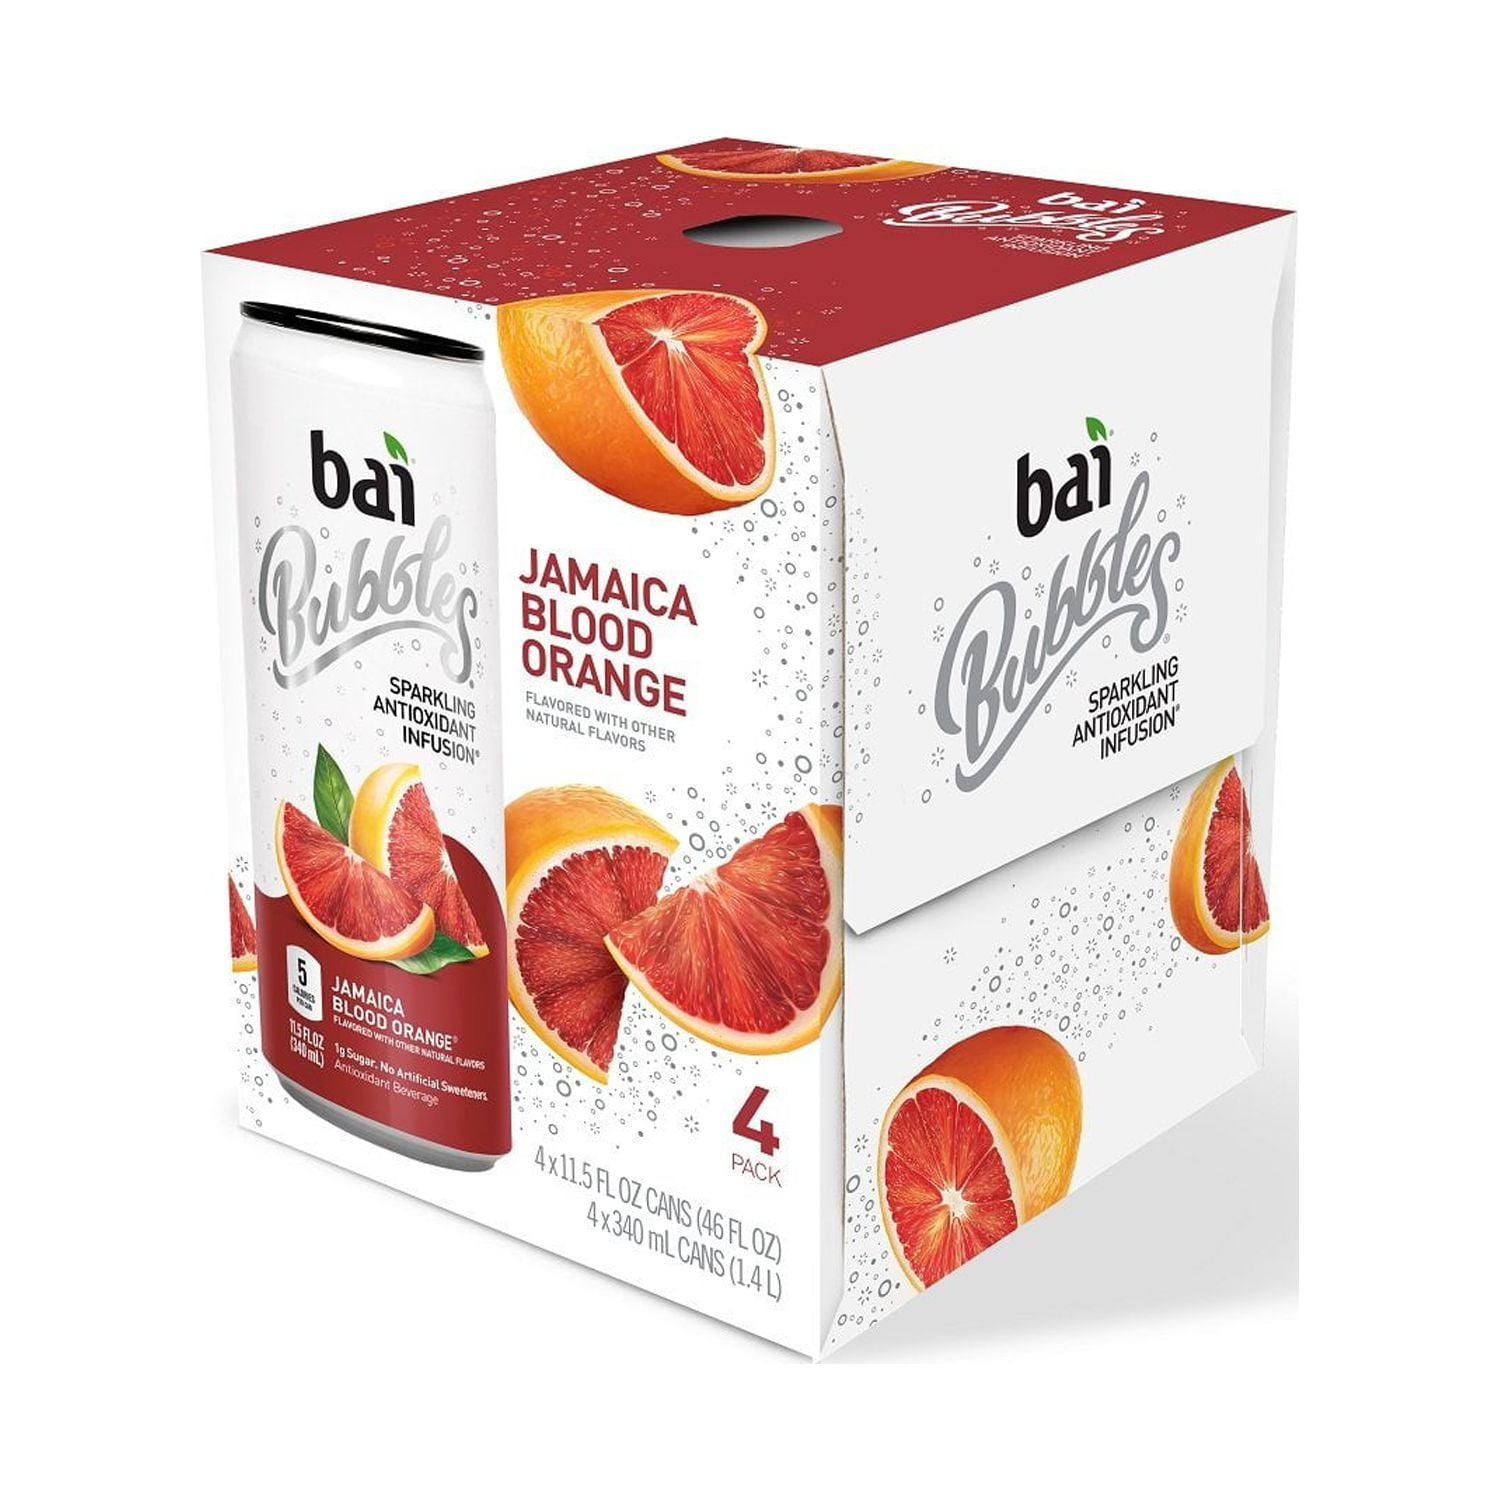 Bai Bubbles, Sparkling Water, Jamaica Blood Orange, Antioxidant Infused  Drinks, 11.5 Fluid Ounce Cans, 12 count 